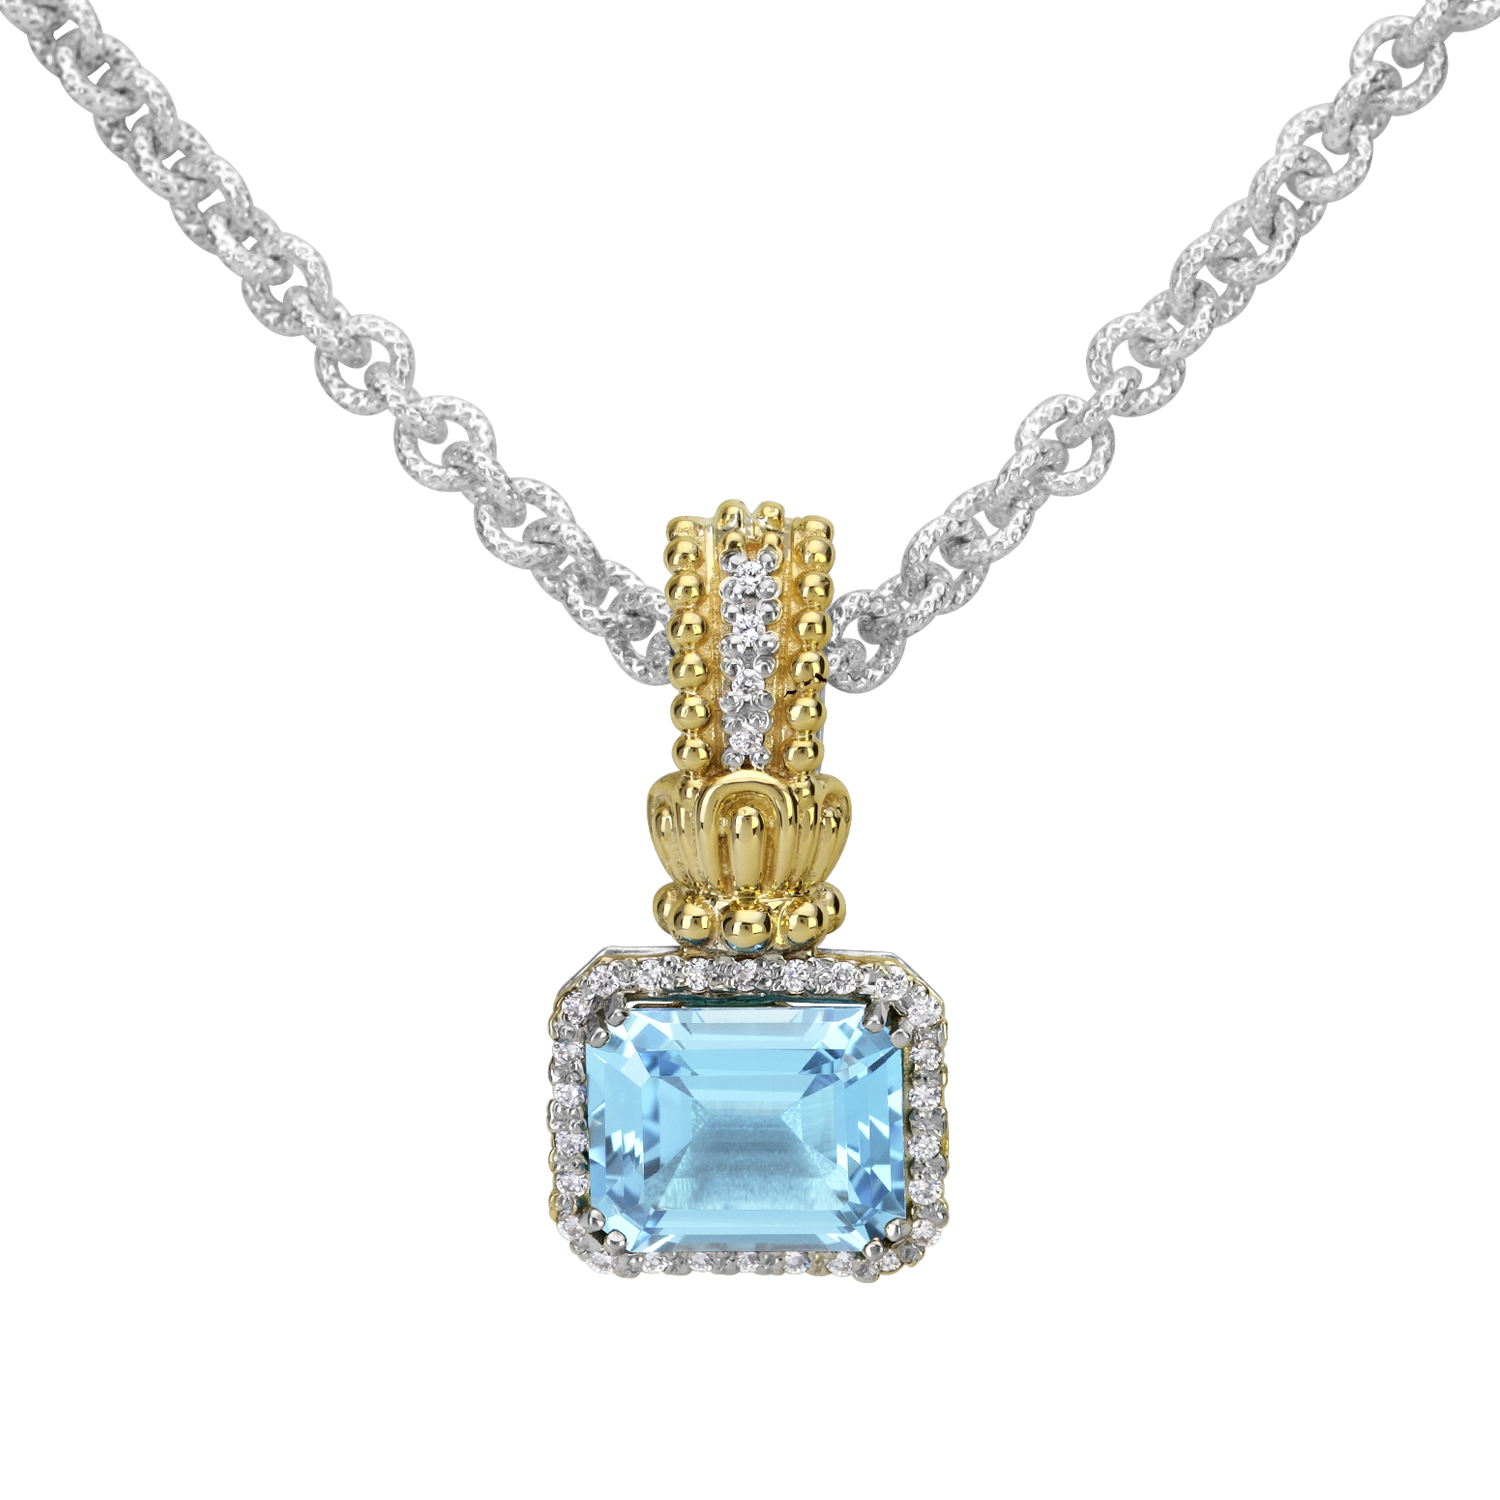 Vahan Sterling Silver & Yellow Gold Gemstone Pendant Galloway and Moseley, Inc. Sumter, SC